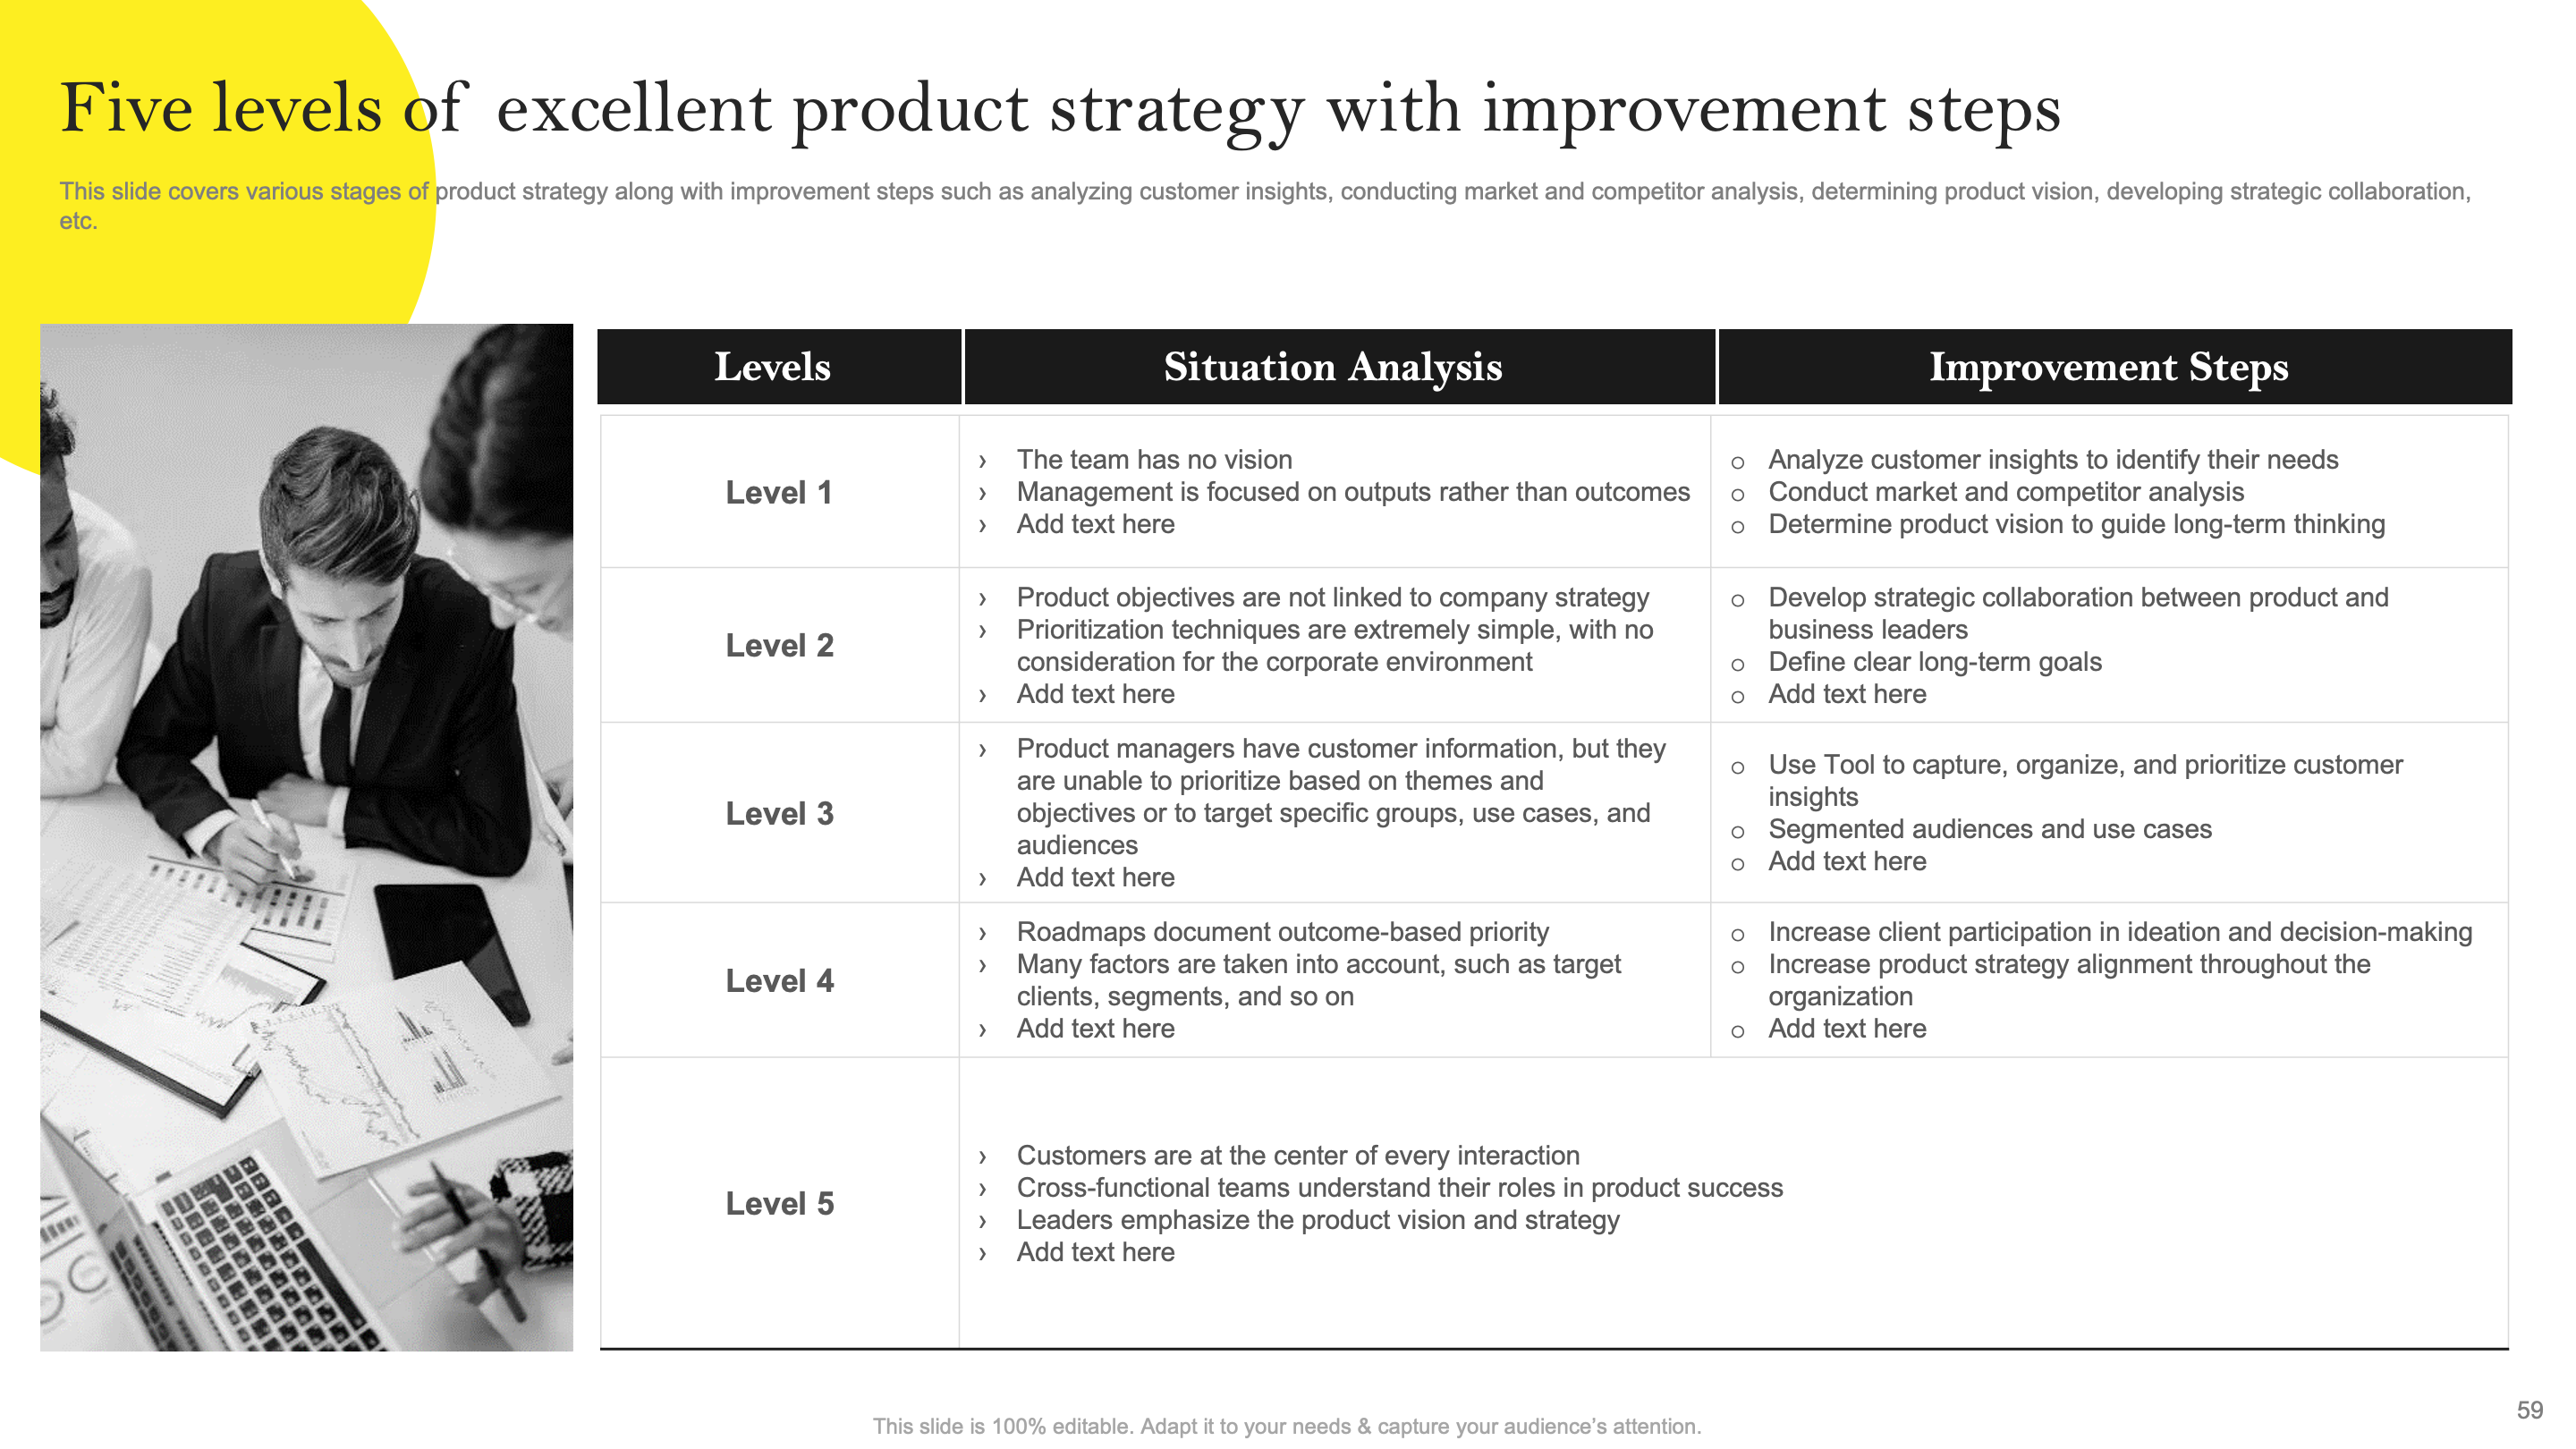 Five Levels of Excellent Product Strategy